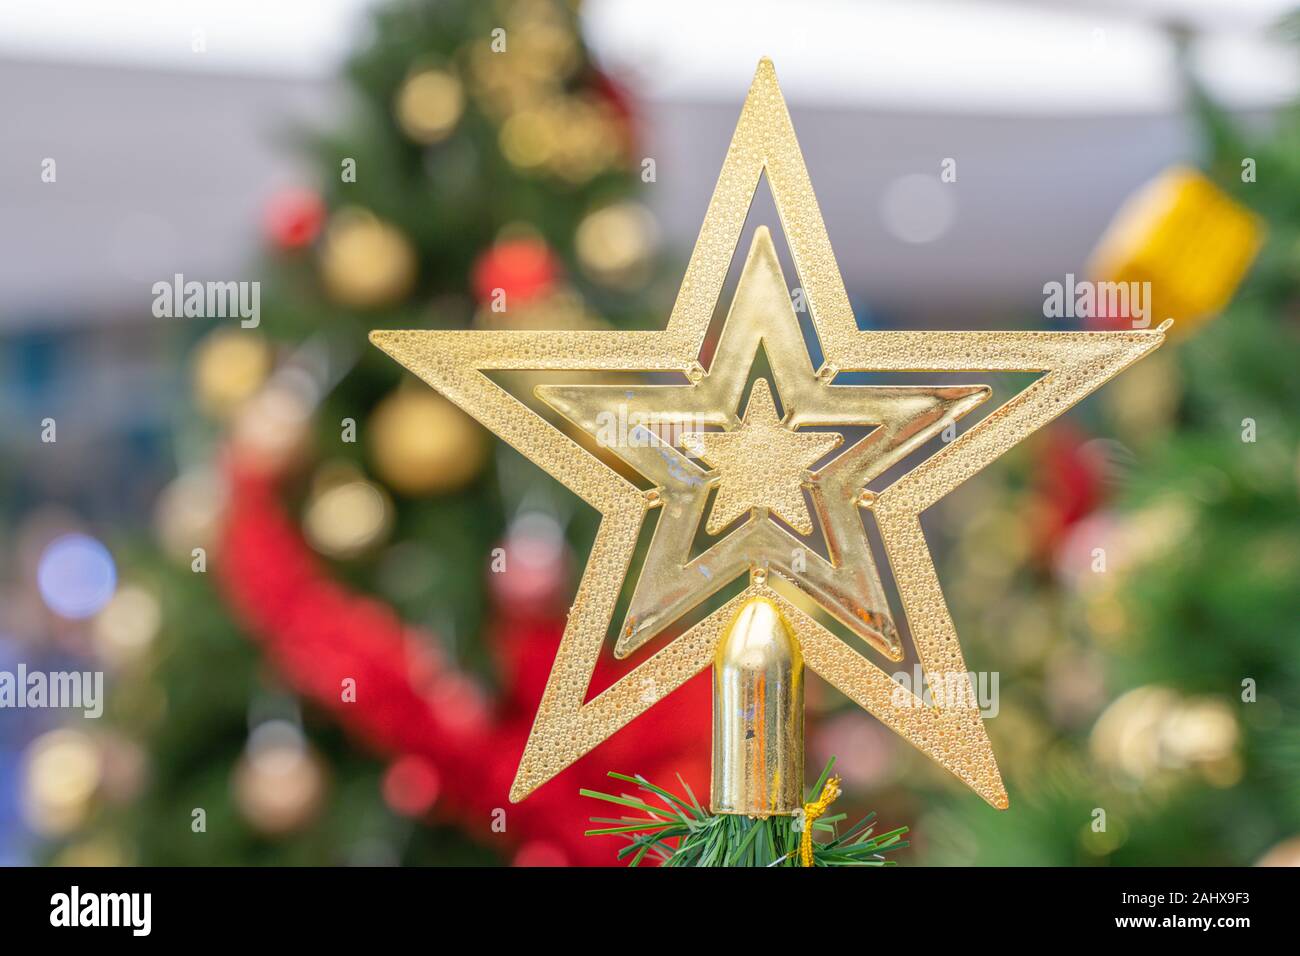 Beautiful Christmas star hanging from a decorated Christmas tree Stock Photo